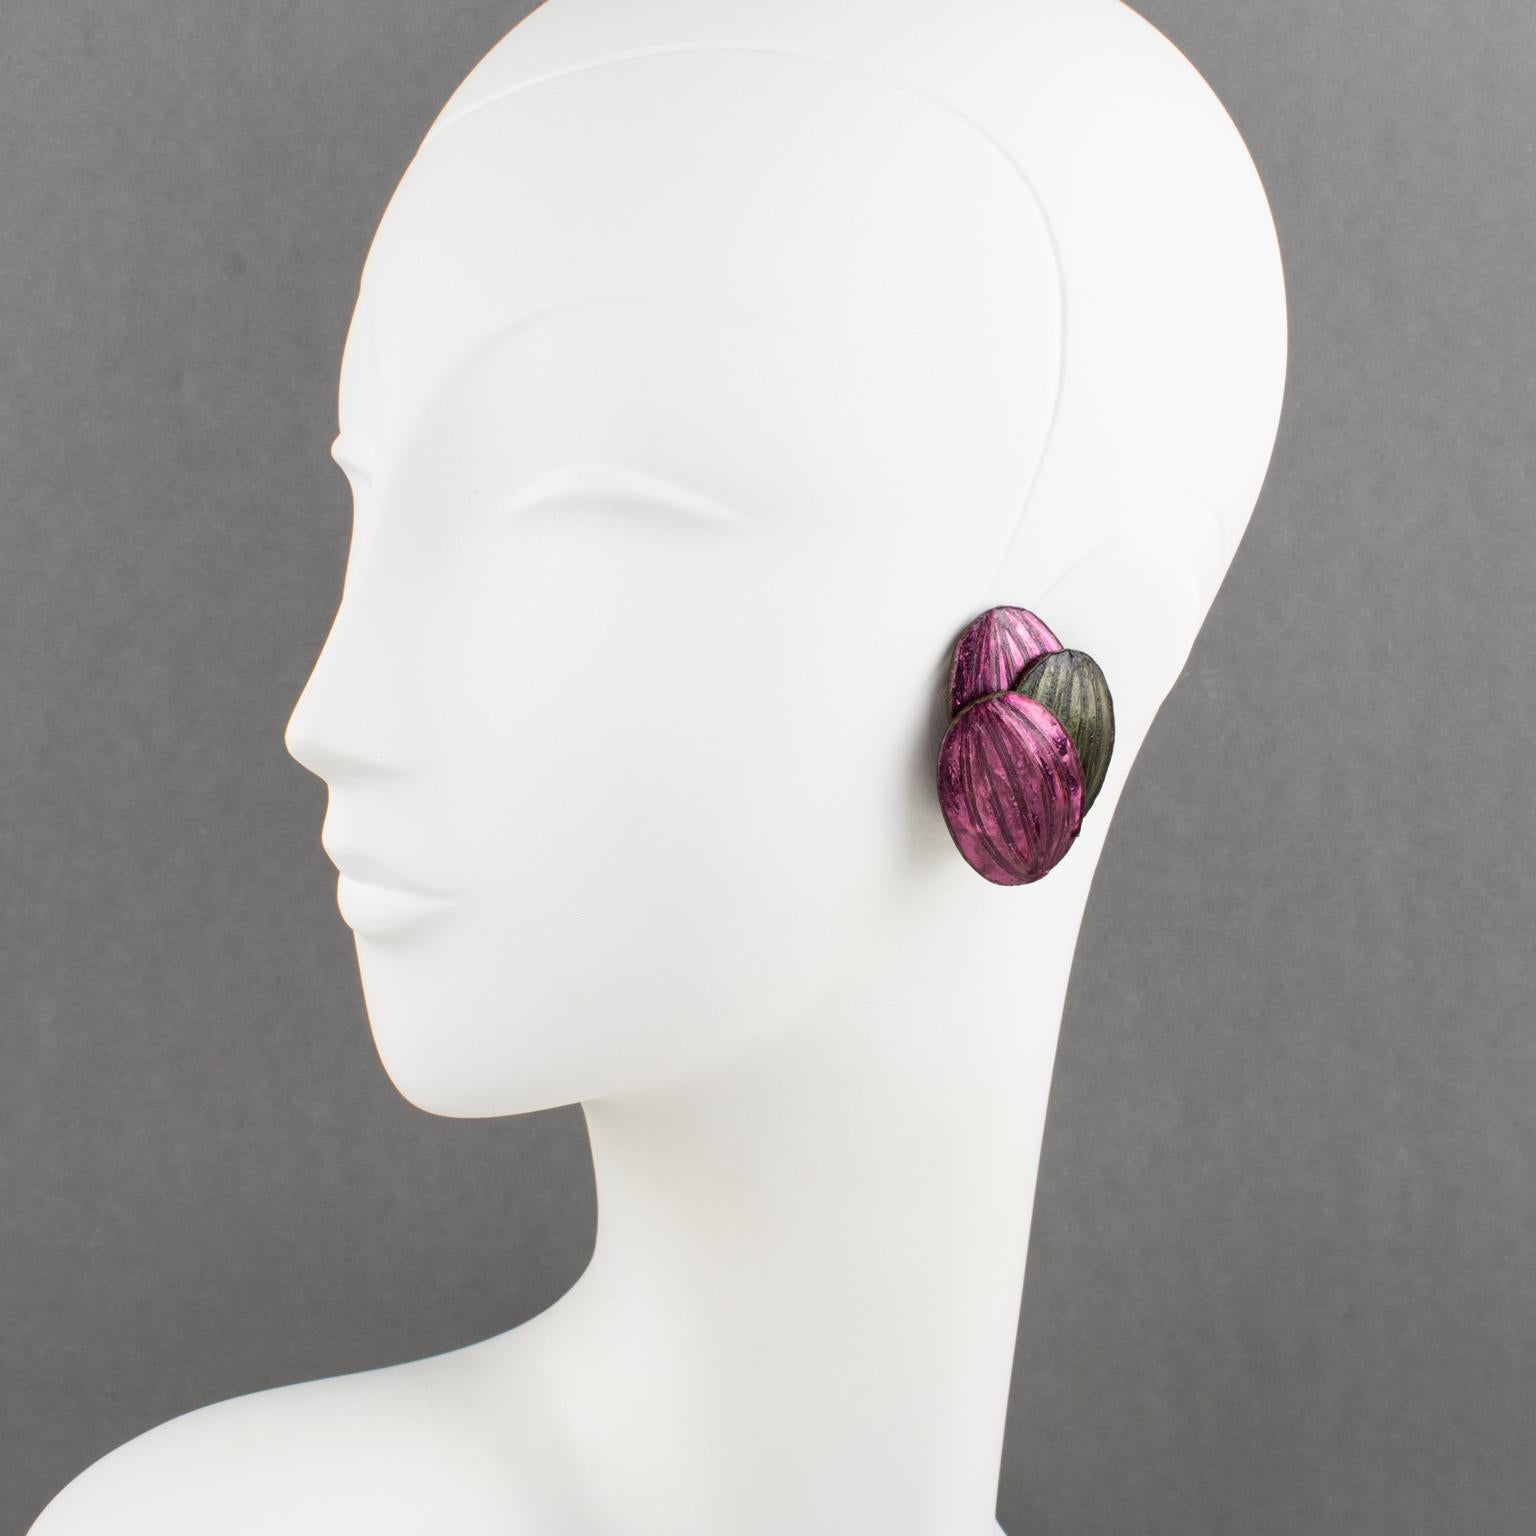 Elegant Monique Vedie Talosel or resin clip-on earrings. Featuring a stylized dimensional flower shape in pearlized purple and green colors. No visible maker's mark, like all the vintage Vedie pieces.
Measurements: 1.38 in. wide (3.4 cm) x 1.88 in.